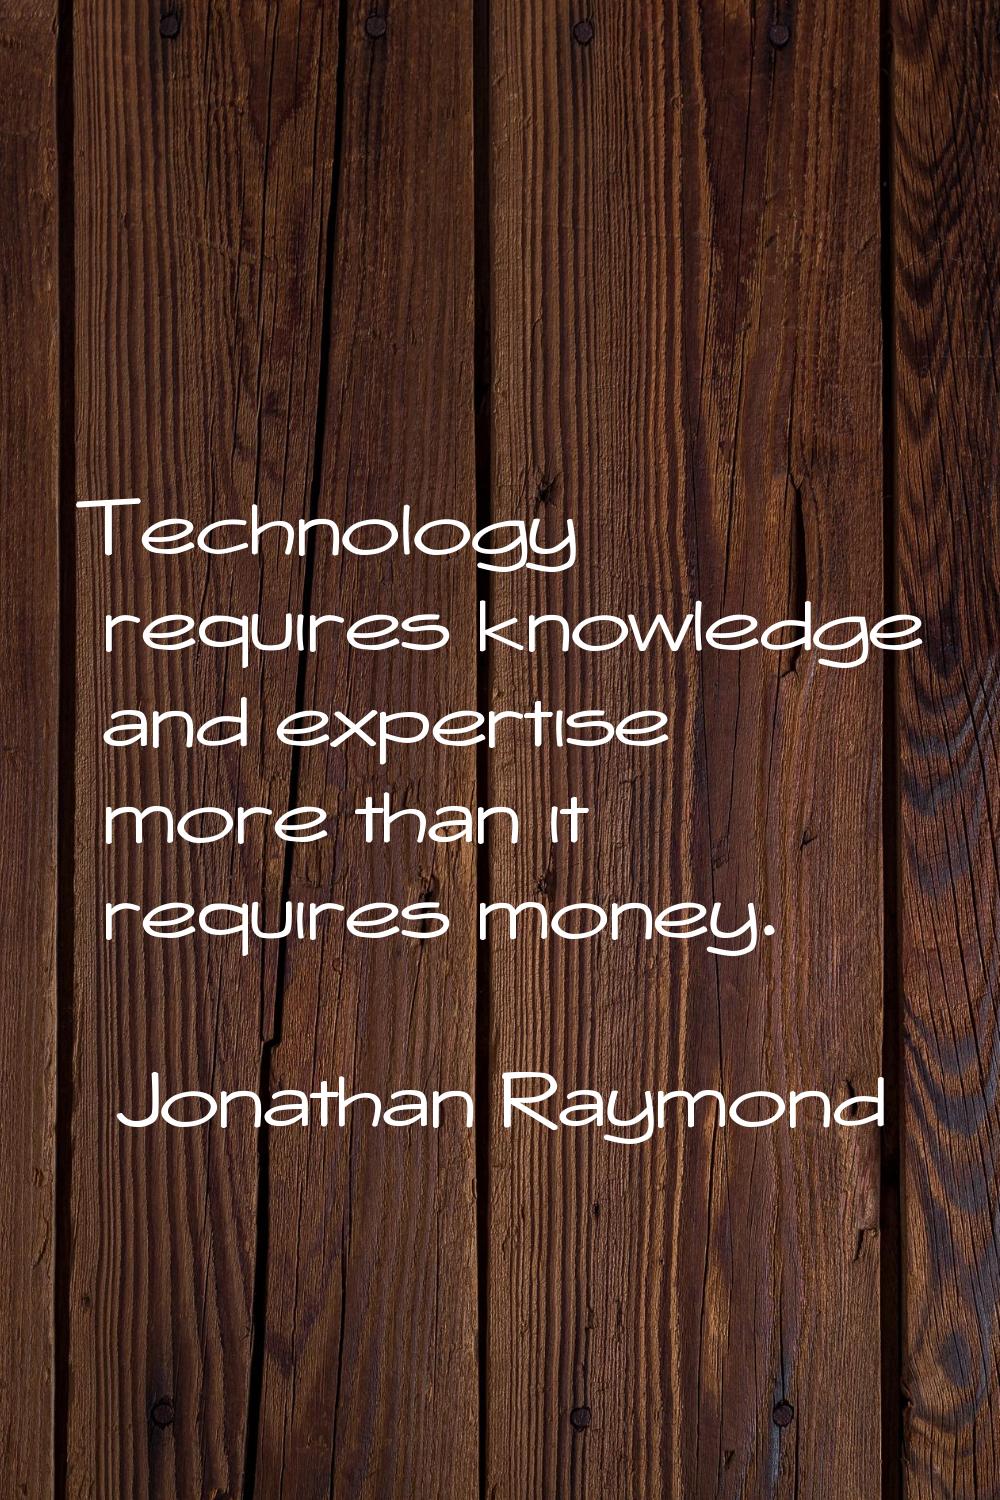 Technology requires knowledge and expertise more than it requires money.